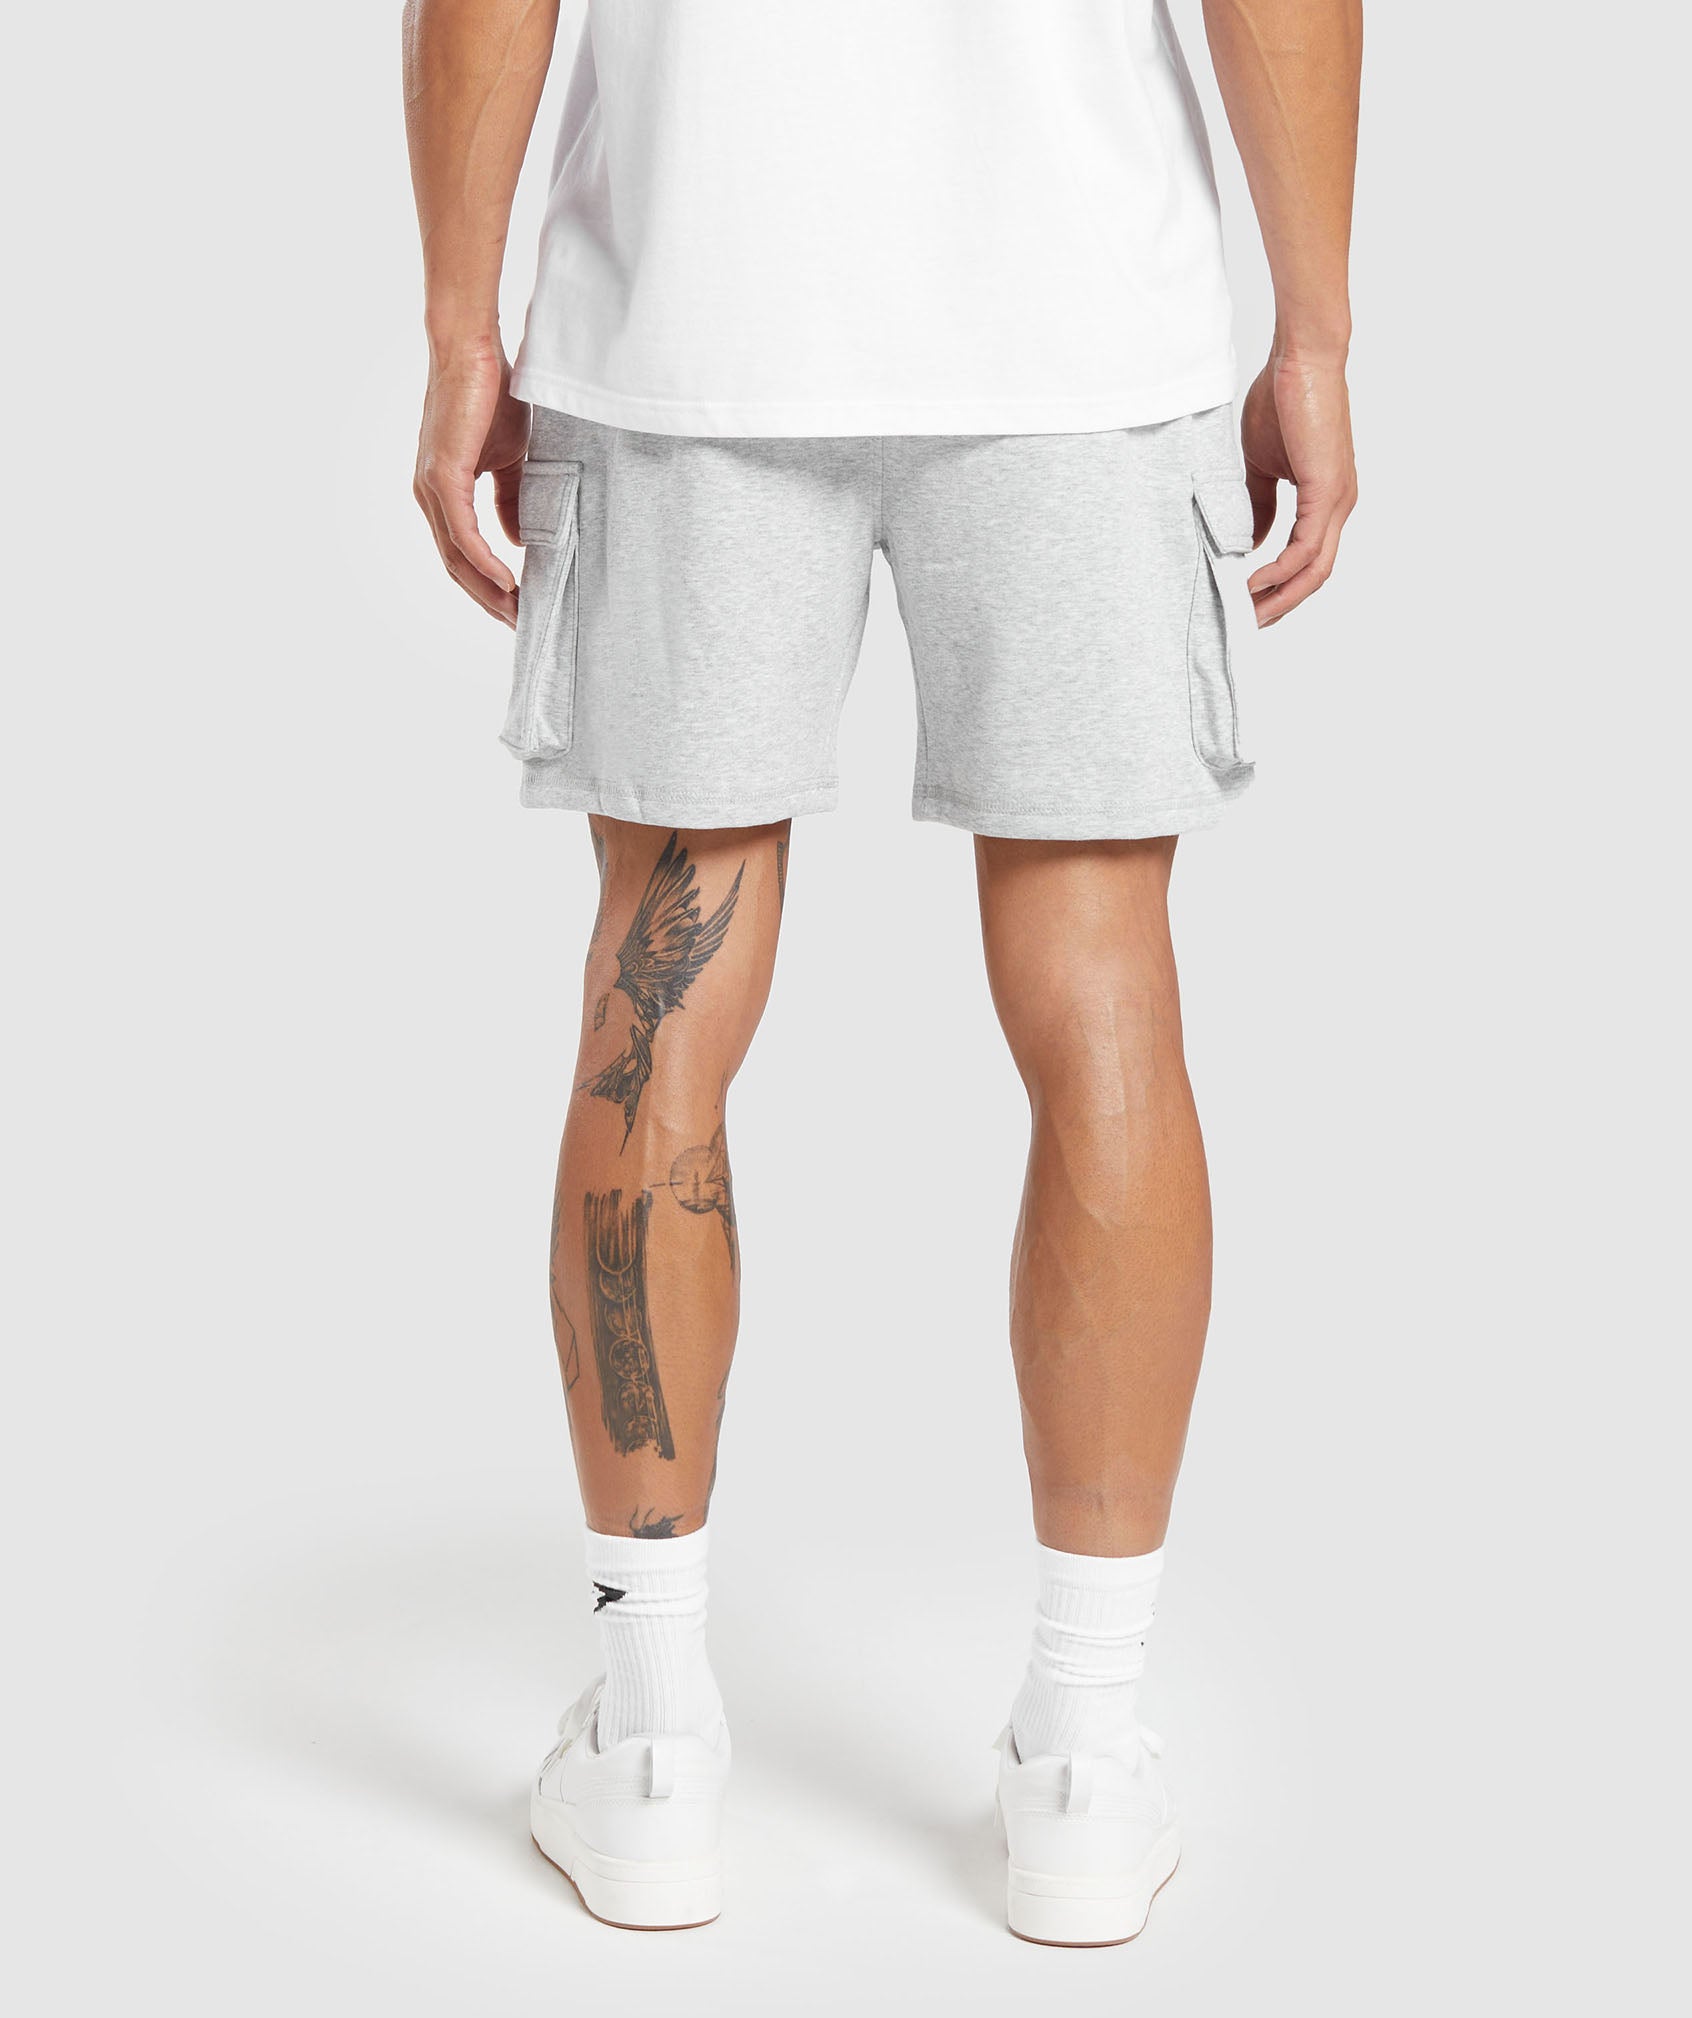 Crest Cargo Shorts in Light Grey Marl - view 2